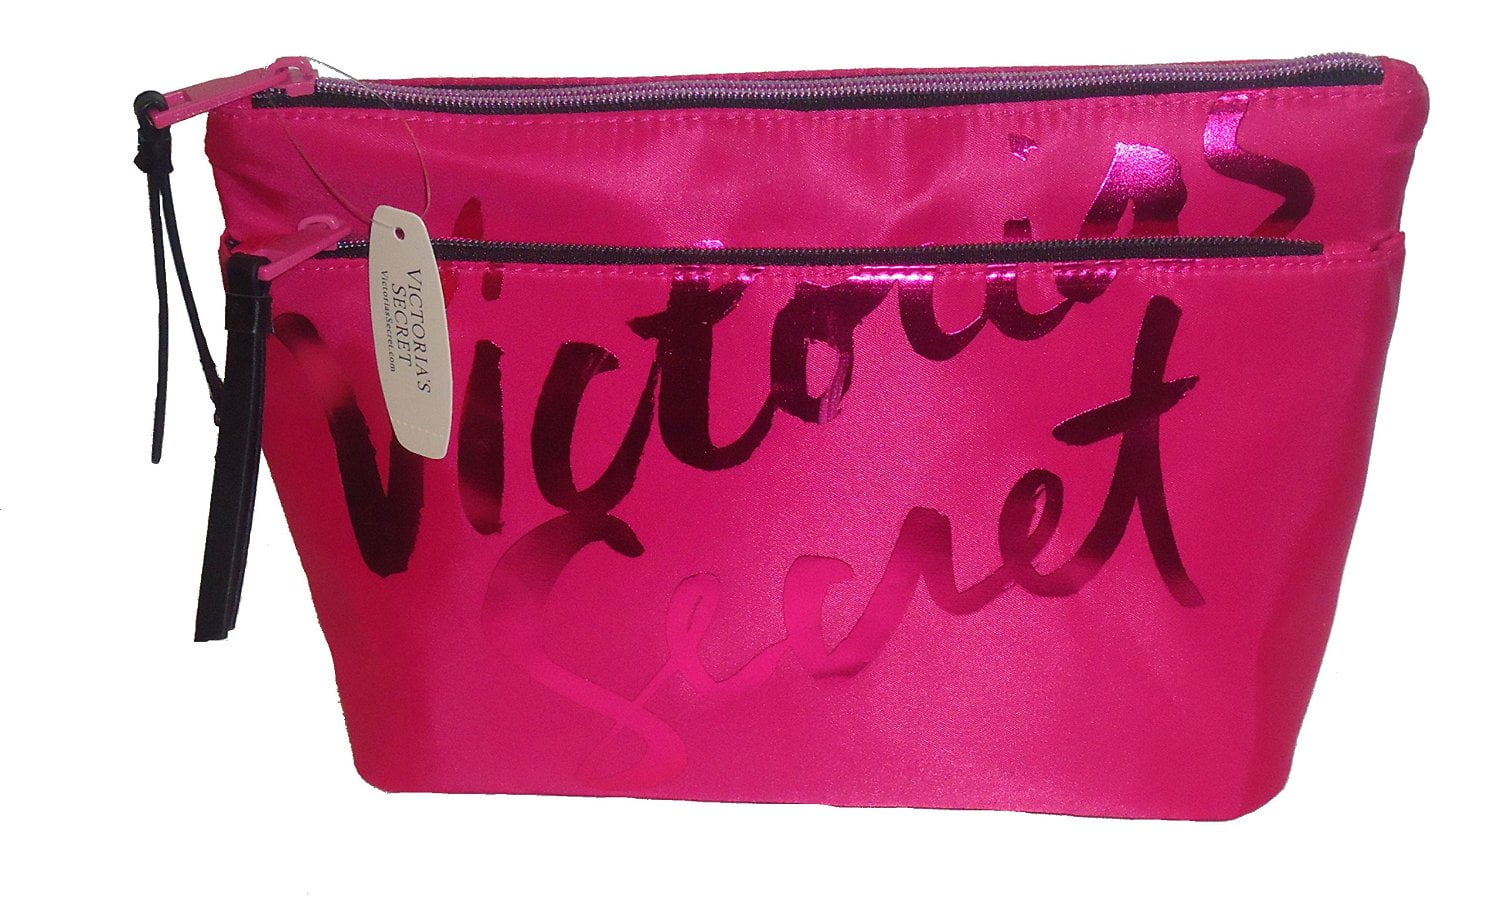 Victoria's Secret Satin Double Zip Cosmetic Make-up Bag Hot Pink Gold